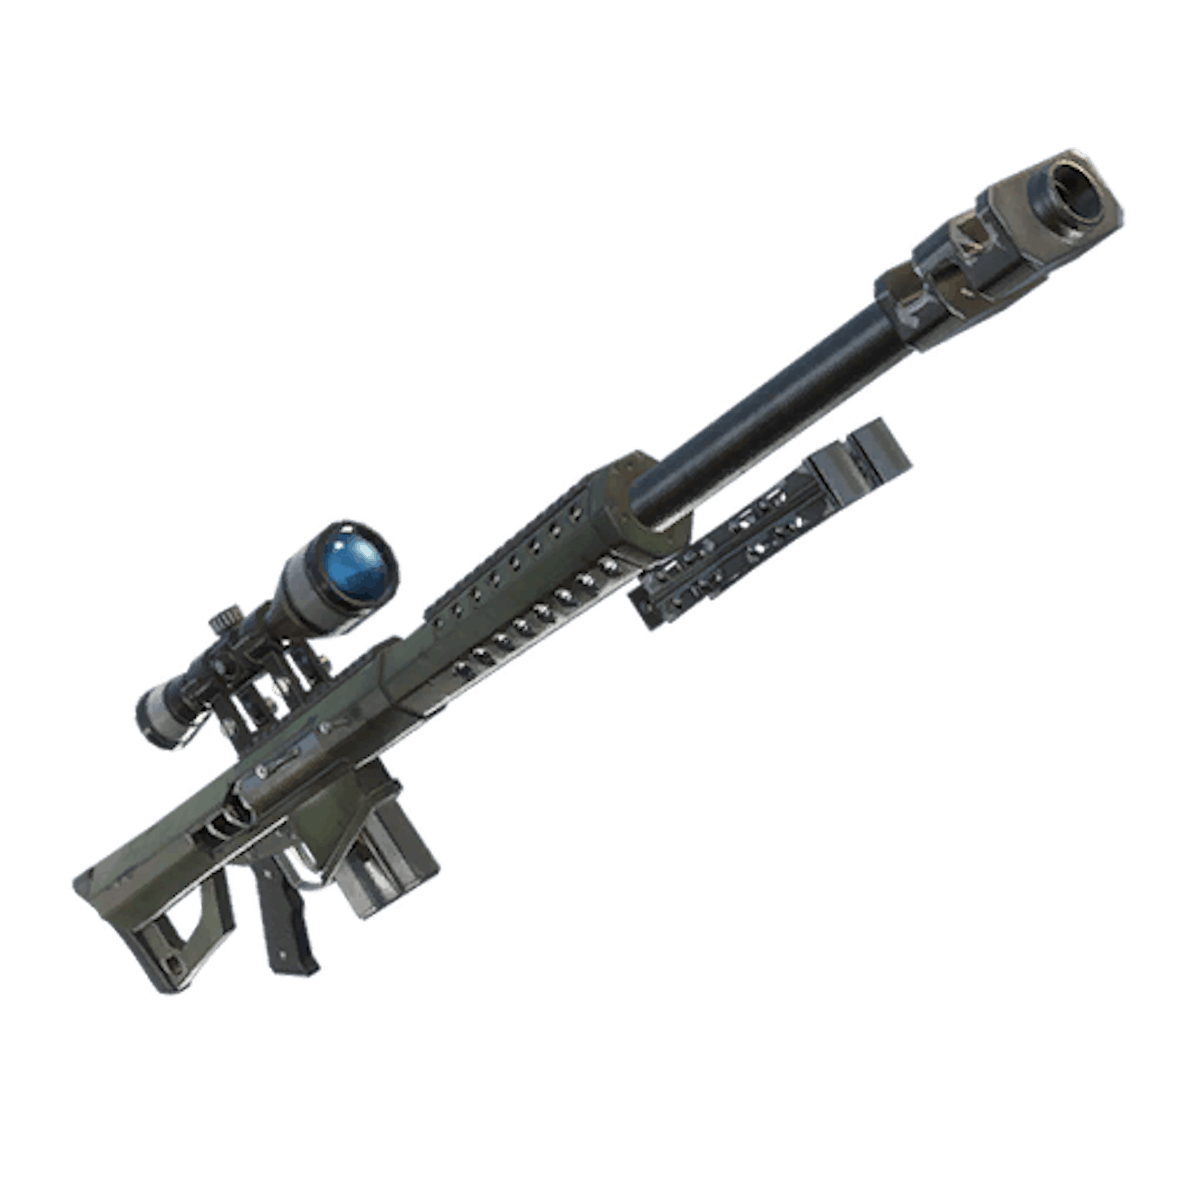 leaked heavy sniper rifle in fortnite will shoot through walls - render fortnite png 3d